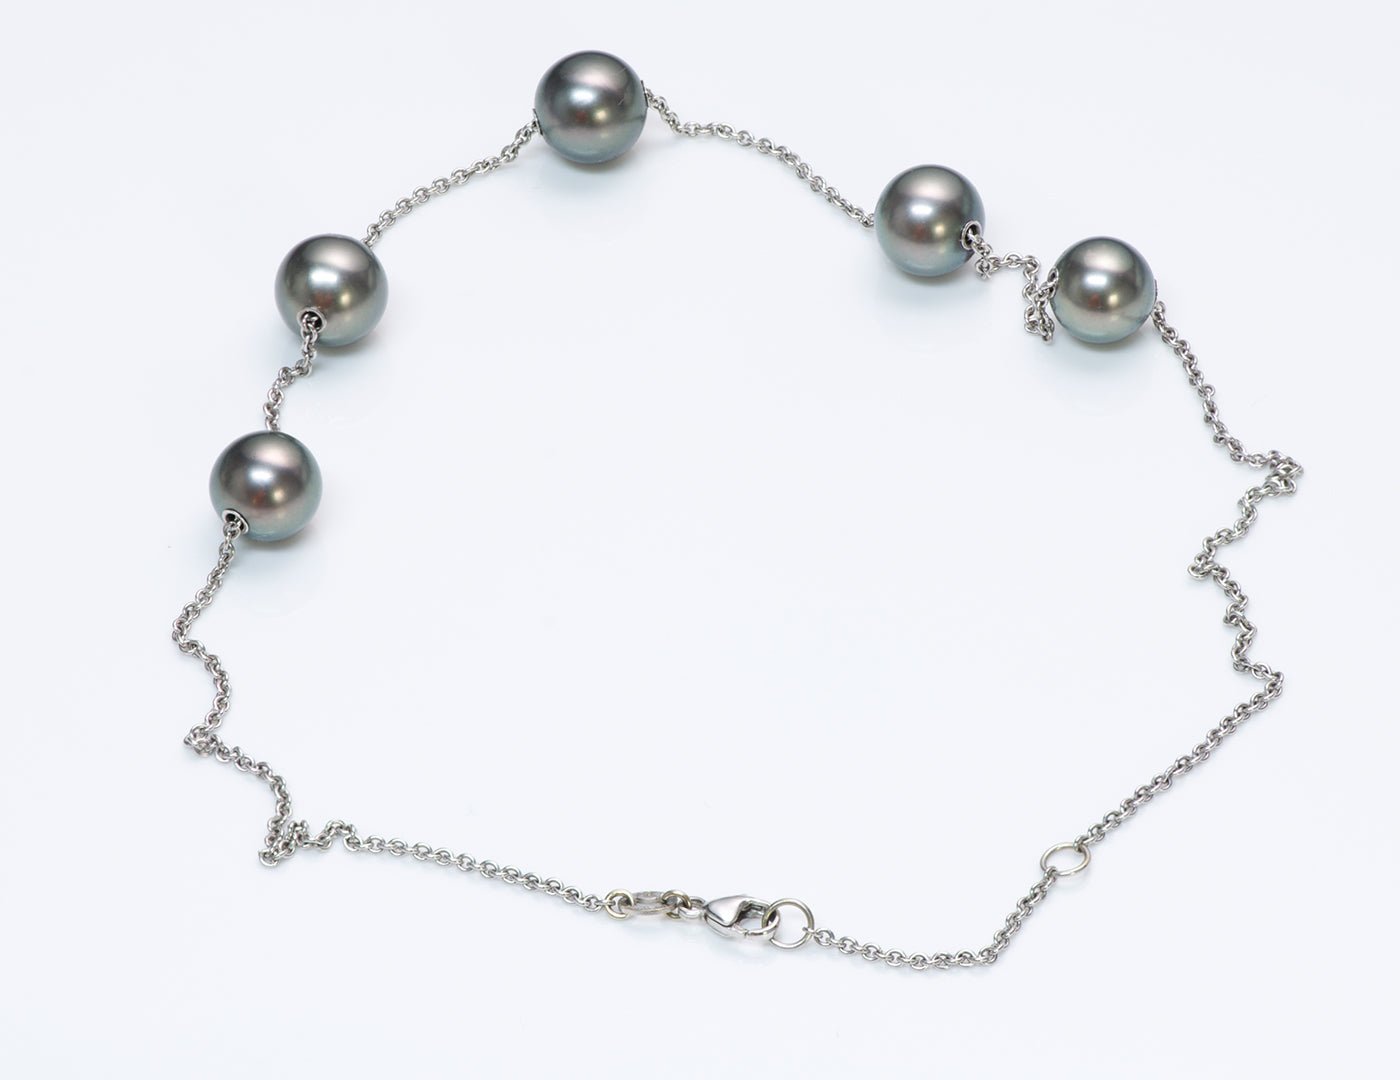 Mikimoto Pearls in Motion 18K Gold Necklace